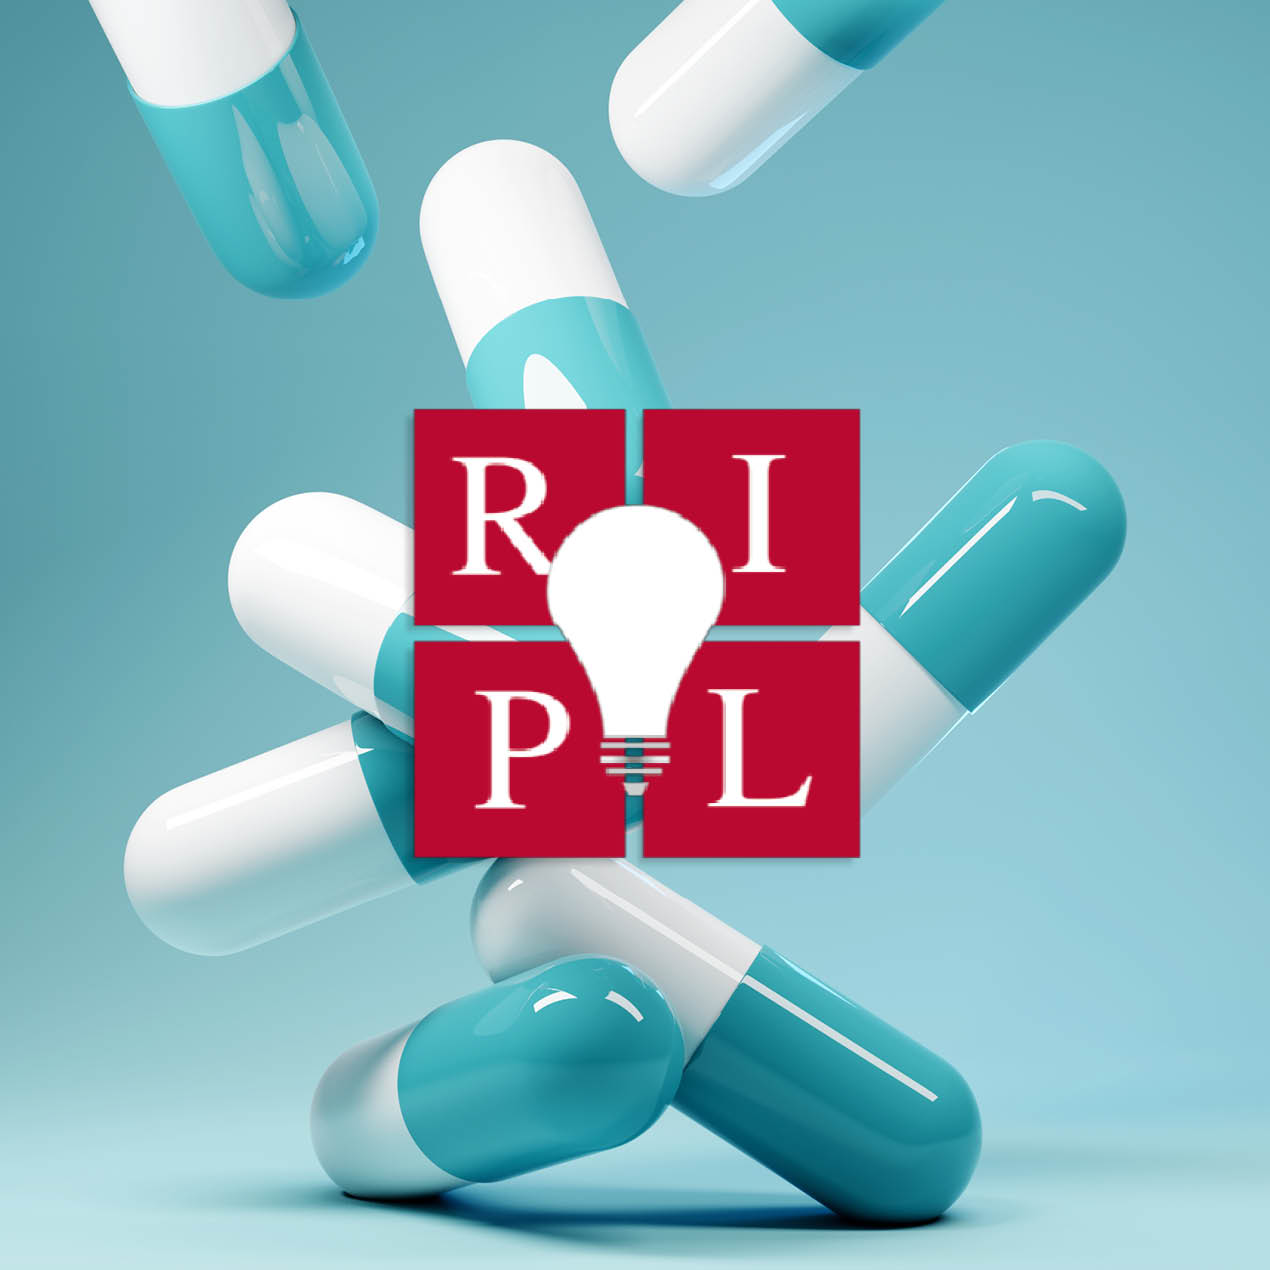 Pill capsules cascading behind the UIC Review of Intellectual Property Law Journal logo